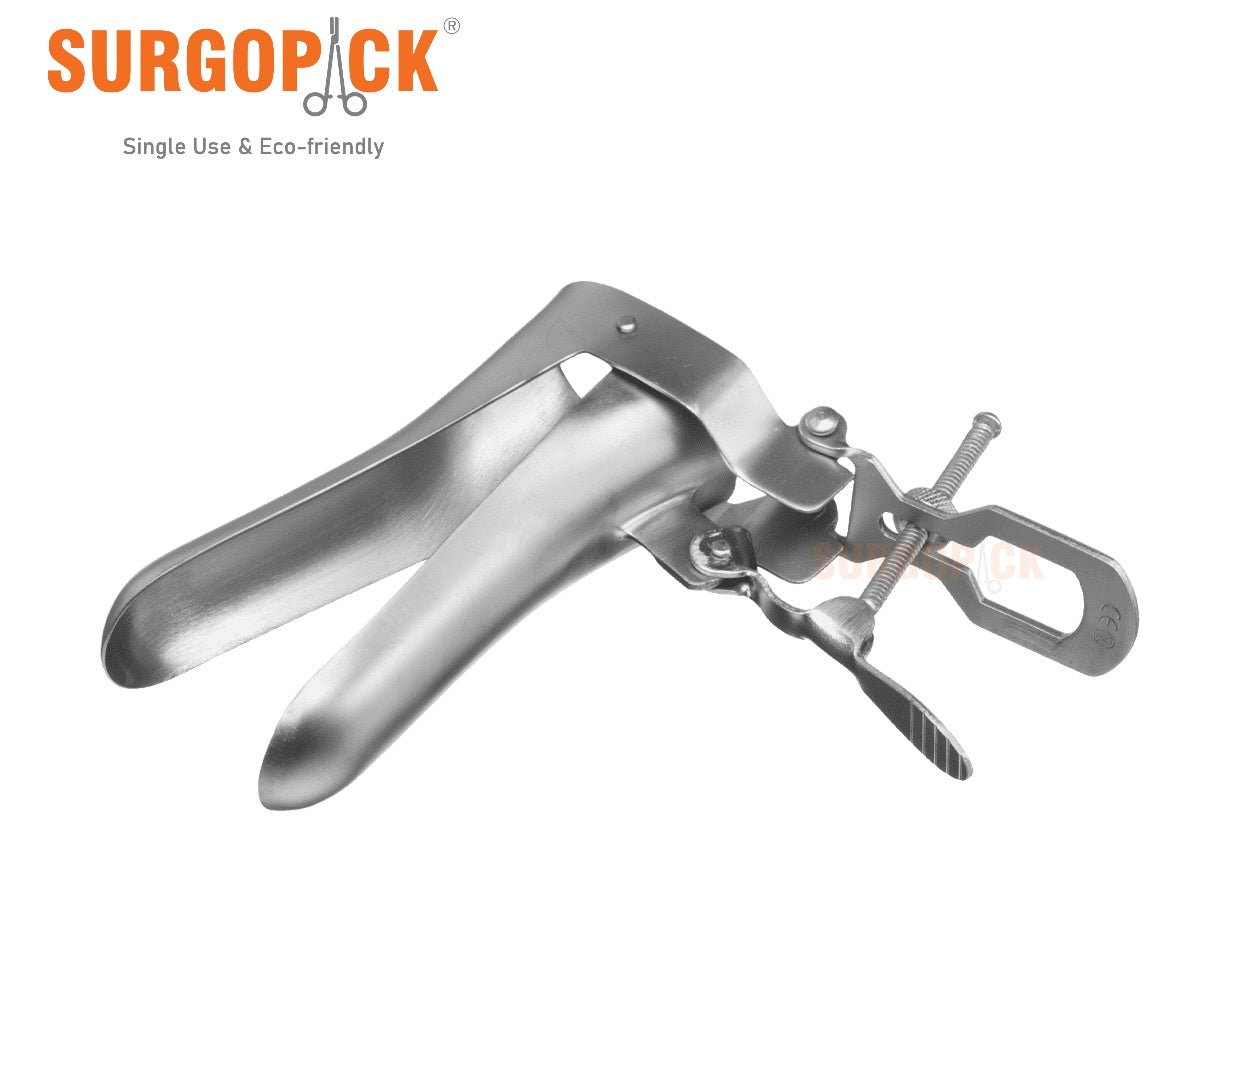 Box 20 Surgopack® Sterile Single Use Cusco Vaginal Speculum Small Size Individually Packed Stainless Steel - EmpireMedical 